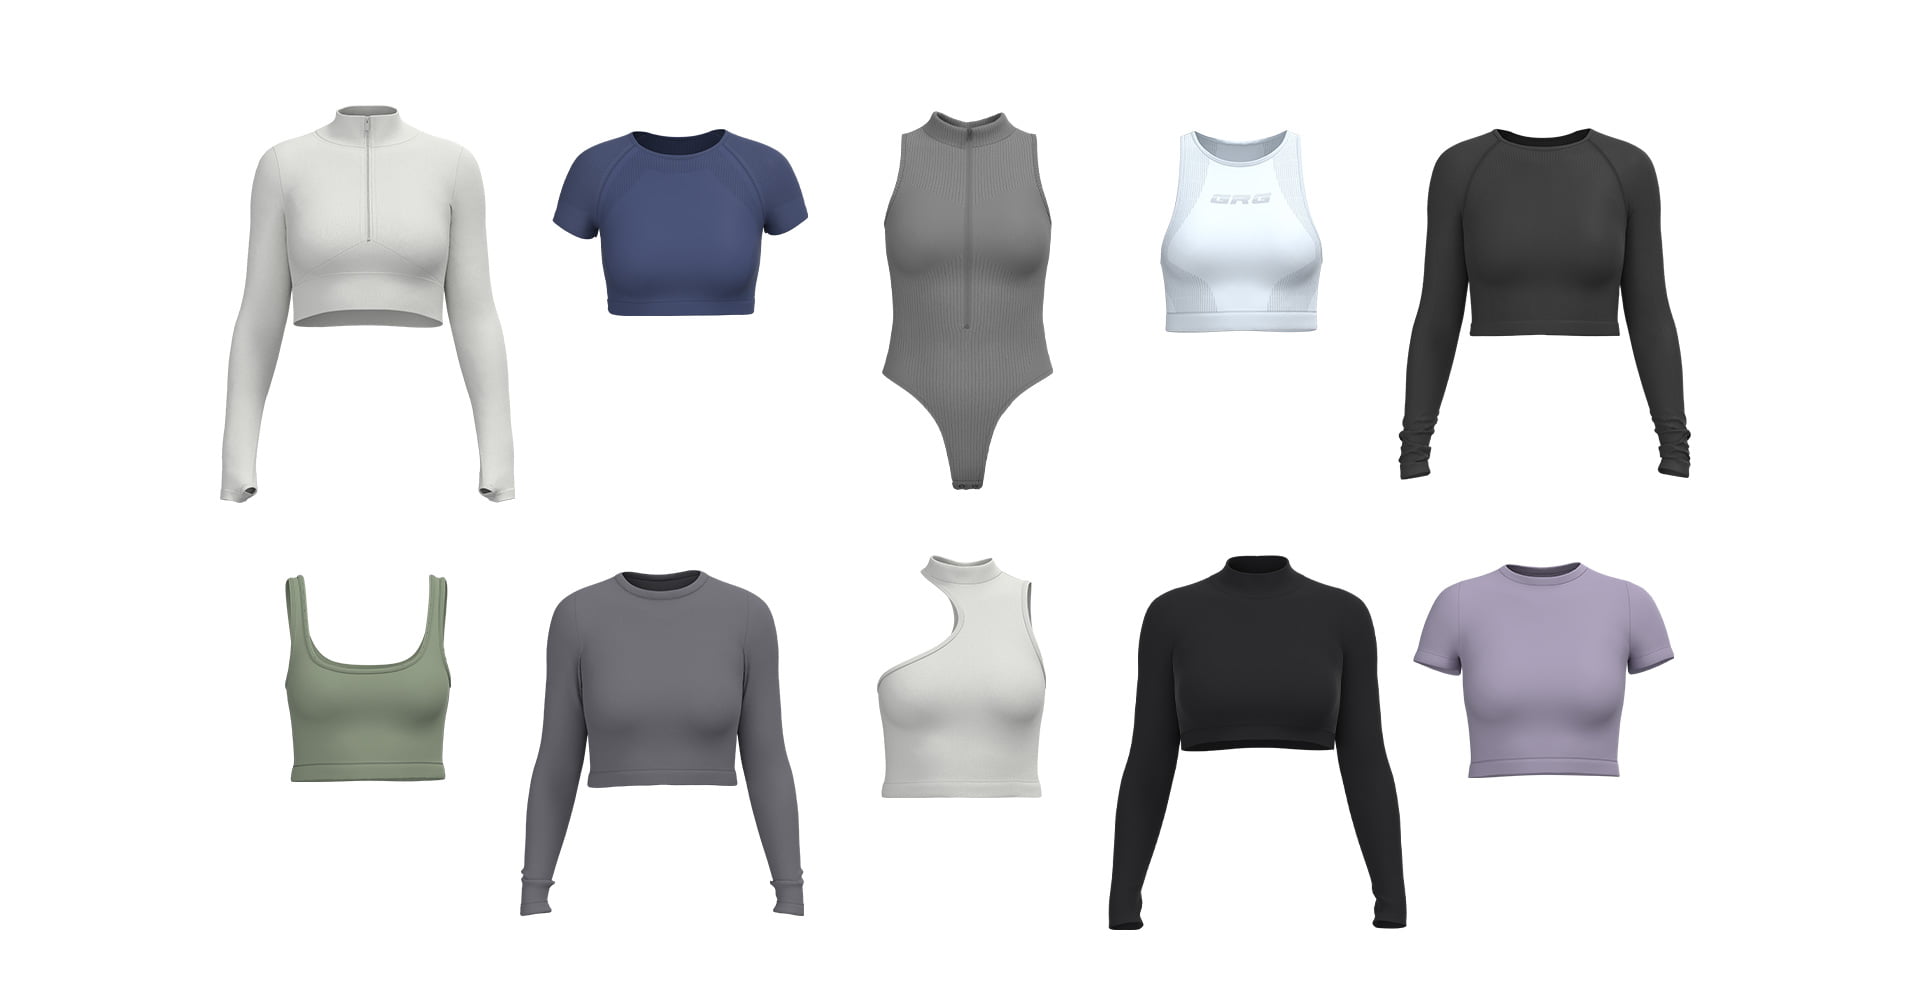 3D images of 10 various seamless fitted tops.